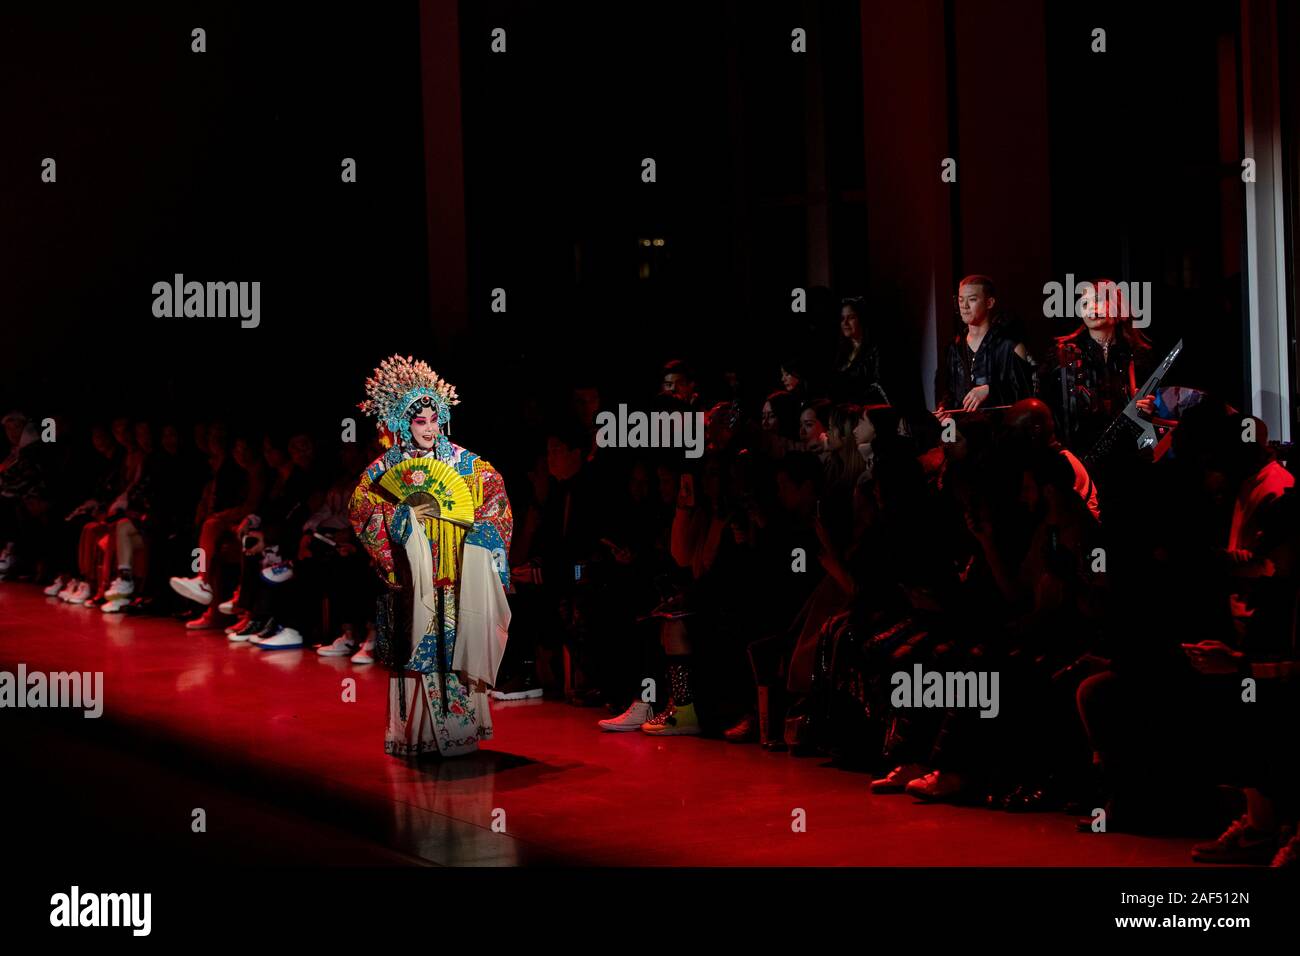 (191212) -- NEW YORK, Dec. 12, 2019 (Xinhua) -- An artist performs at the 'PONY X HARBIN' show during the New York Fashion Week in New York, the United States, Feb. 9, 2019. The show started with a short music piece that was a fusion of Peking Opera and R&B, followed by a catwalk show debuting collection jointly presented by Chinese brand Harbin Beer and American sports brand PONY. In 2019, while the bilateral relationship between China and the United States is going through some rough patches at the national level, wide-ranging exchanges and cooperation at the subnational level have not been Stock Photo